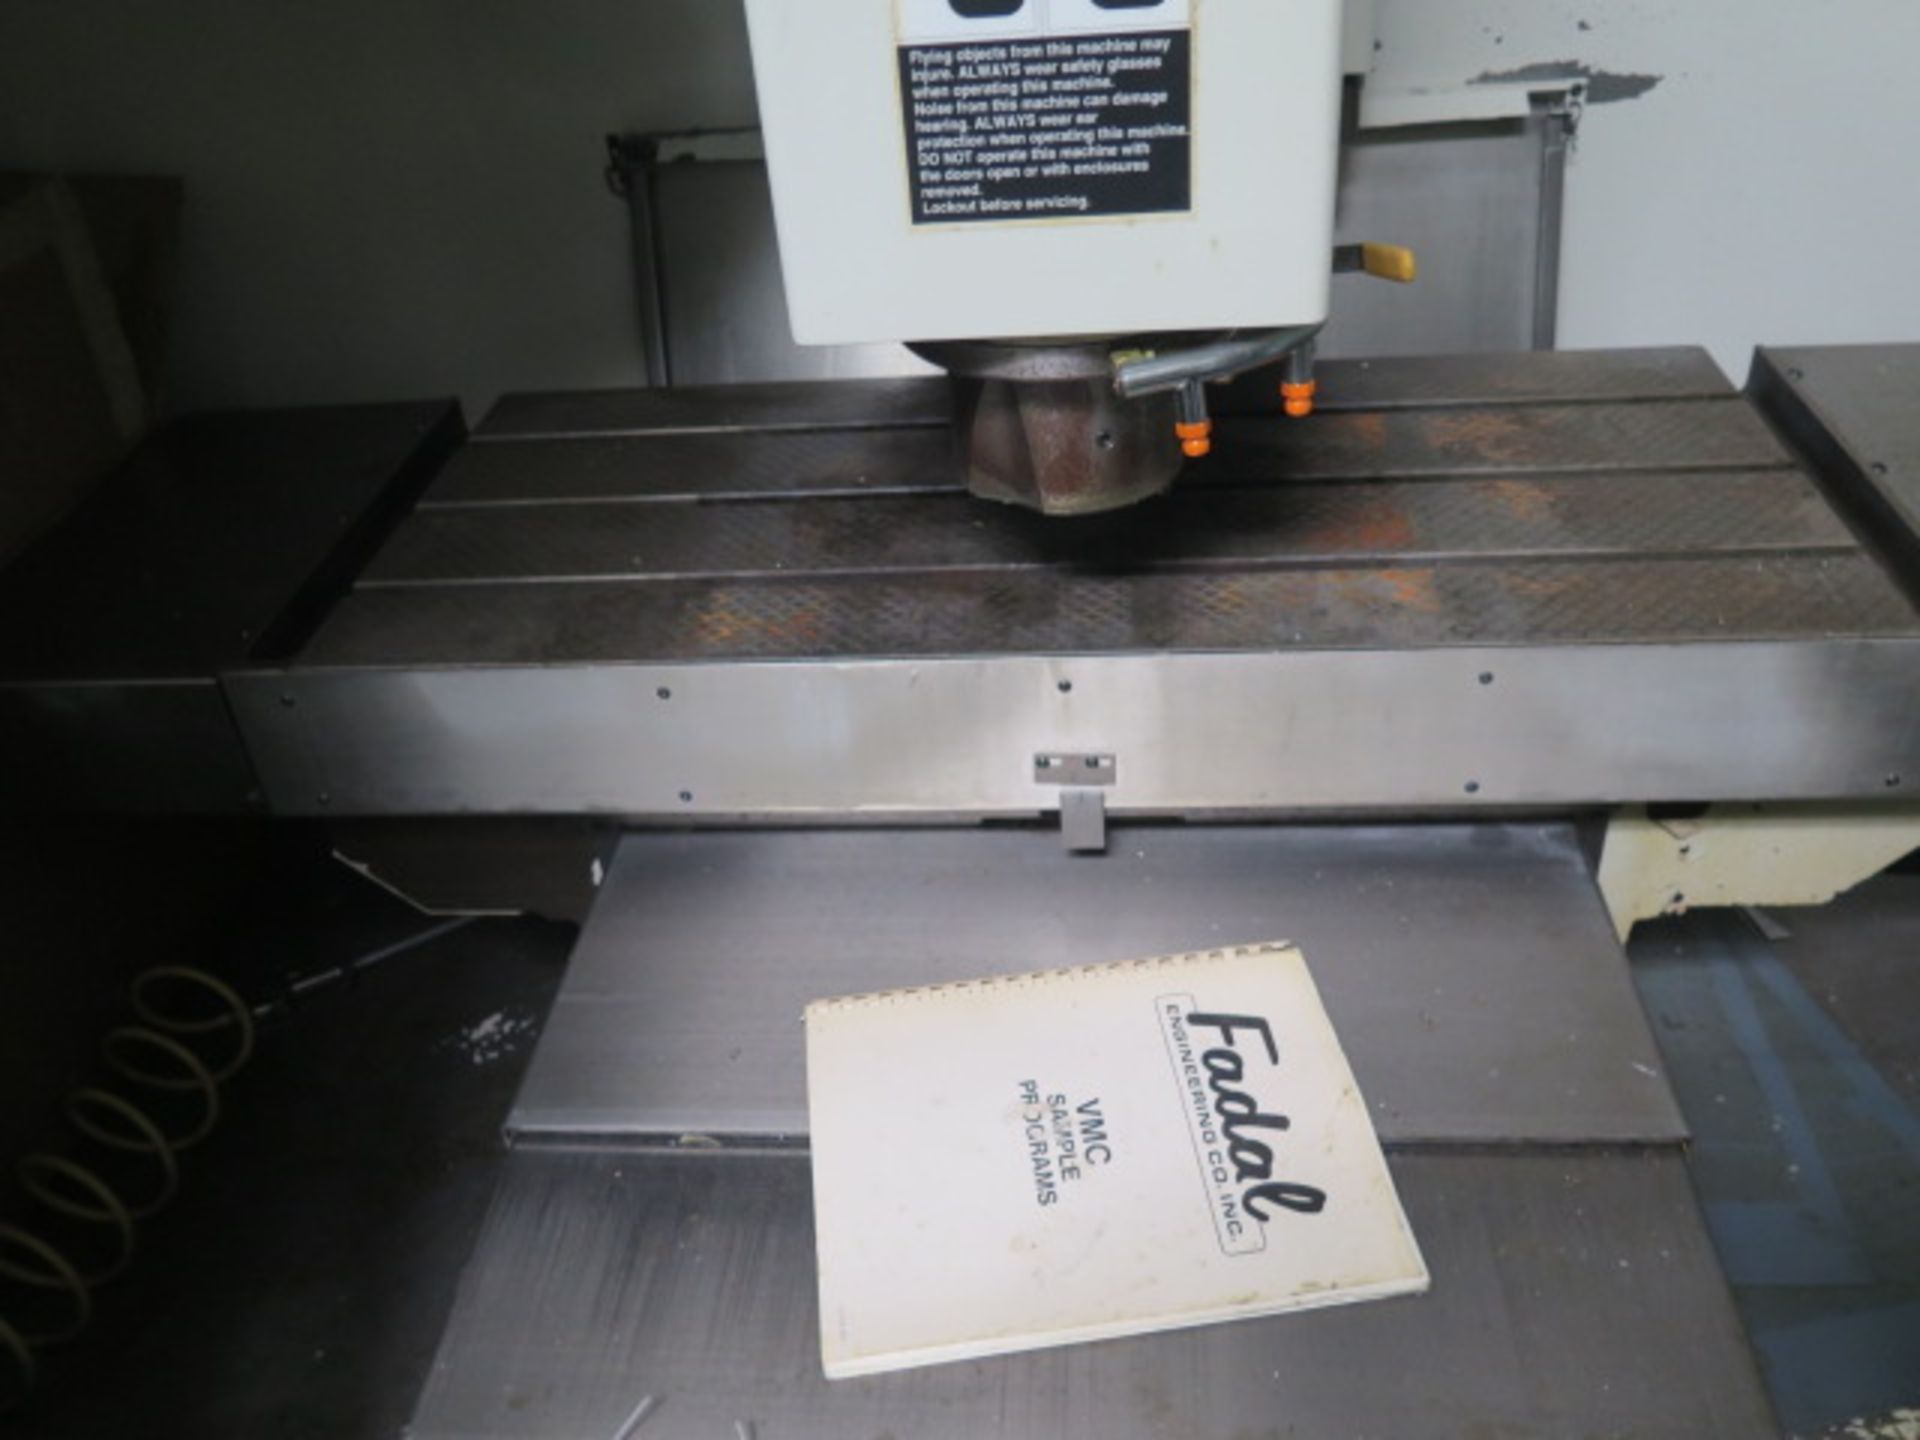 2001 Fadal VMC2216 CNC VMC s/n 012001011980 w/ Fadal Multi Processor, Has a Bad Spindle, SOLD AS IS - Image 8 of 14